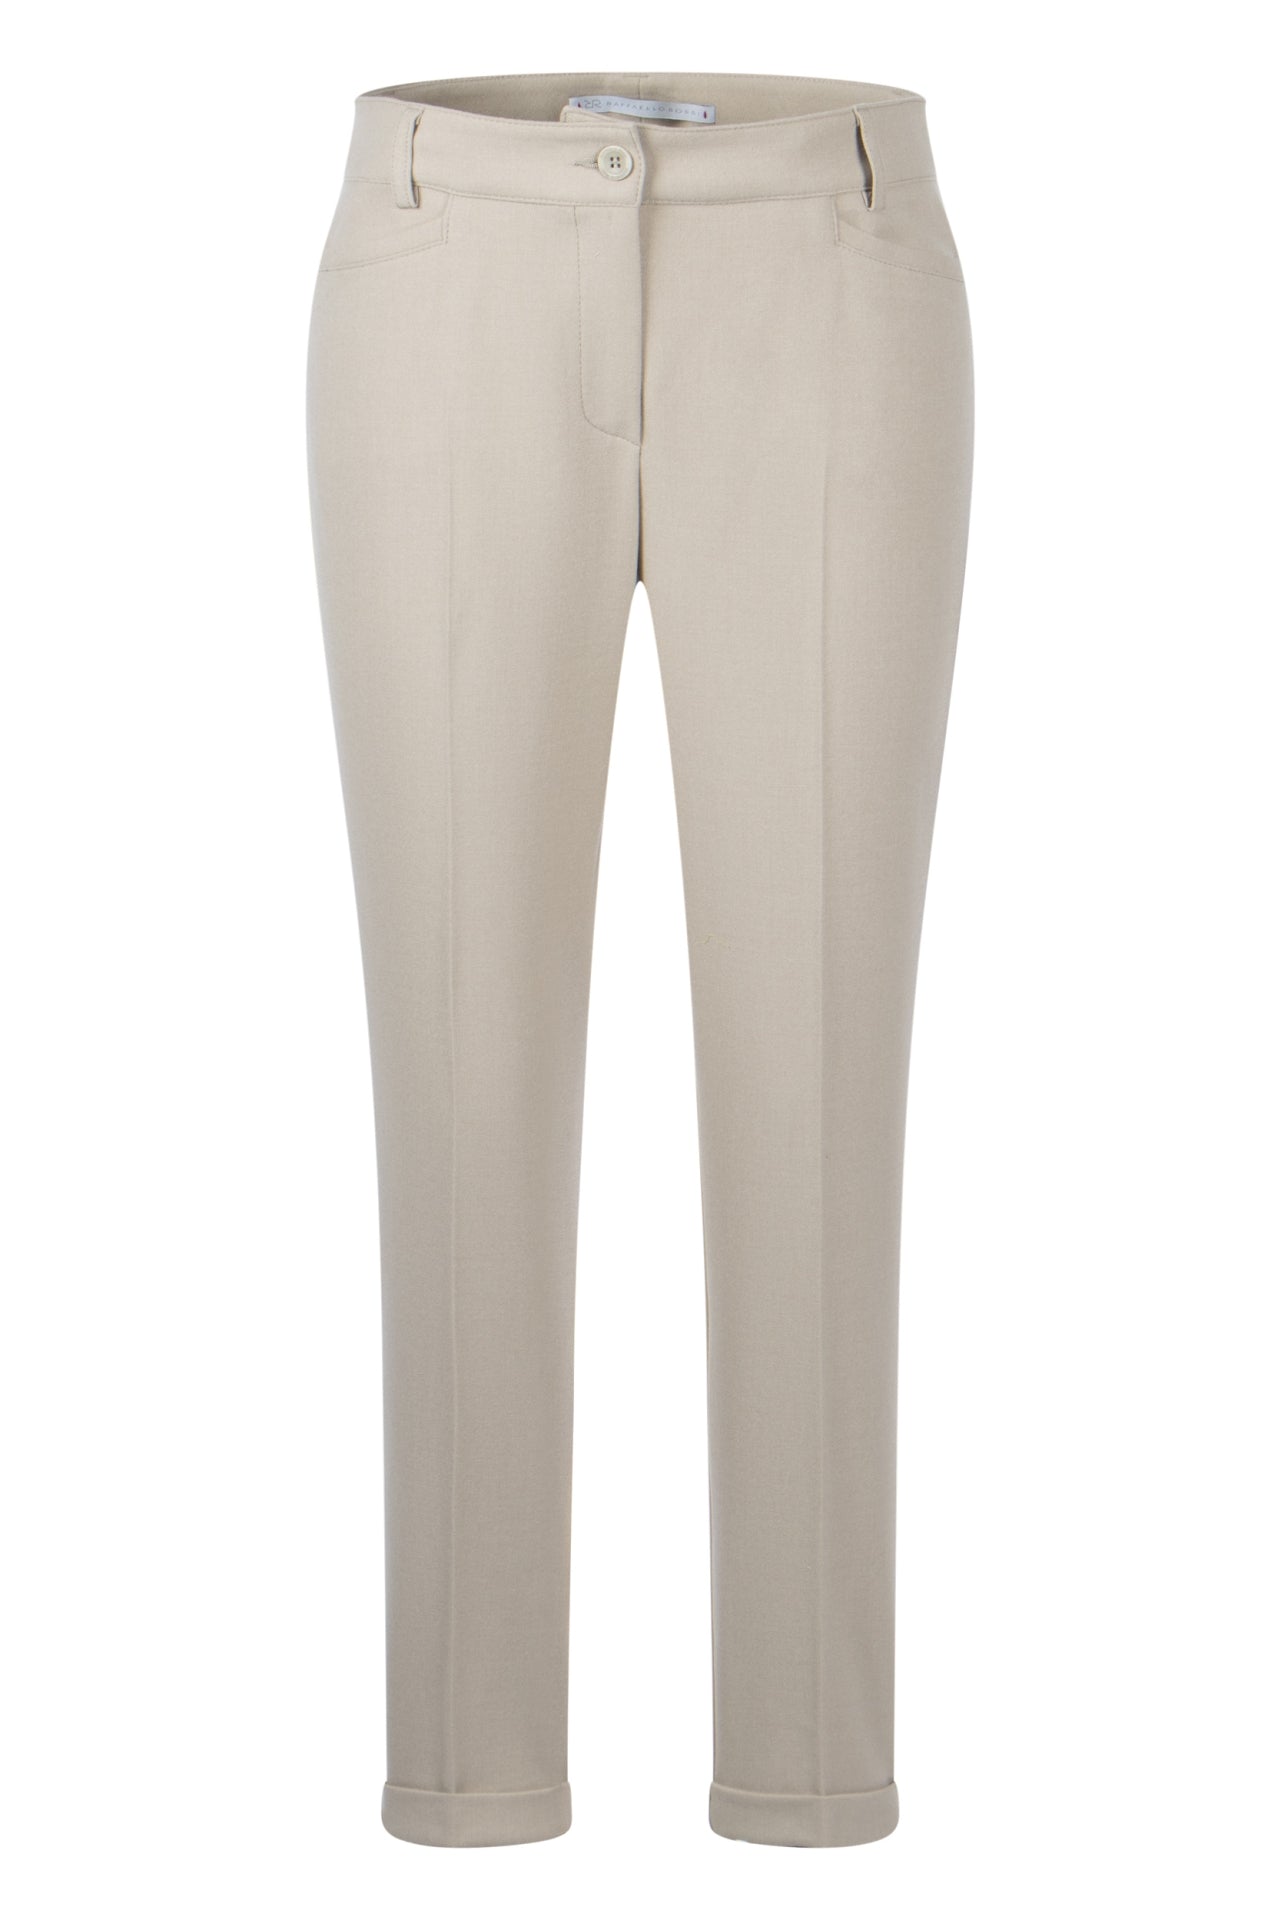 Utell Trousers